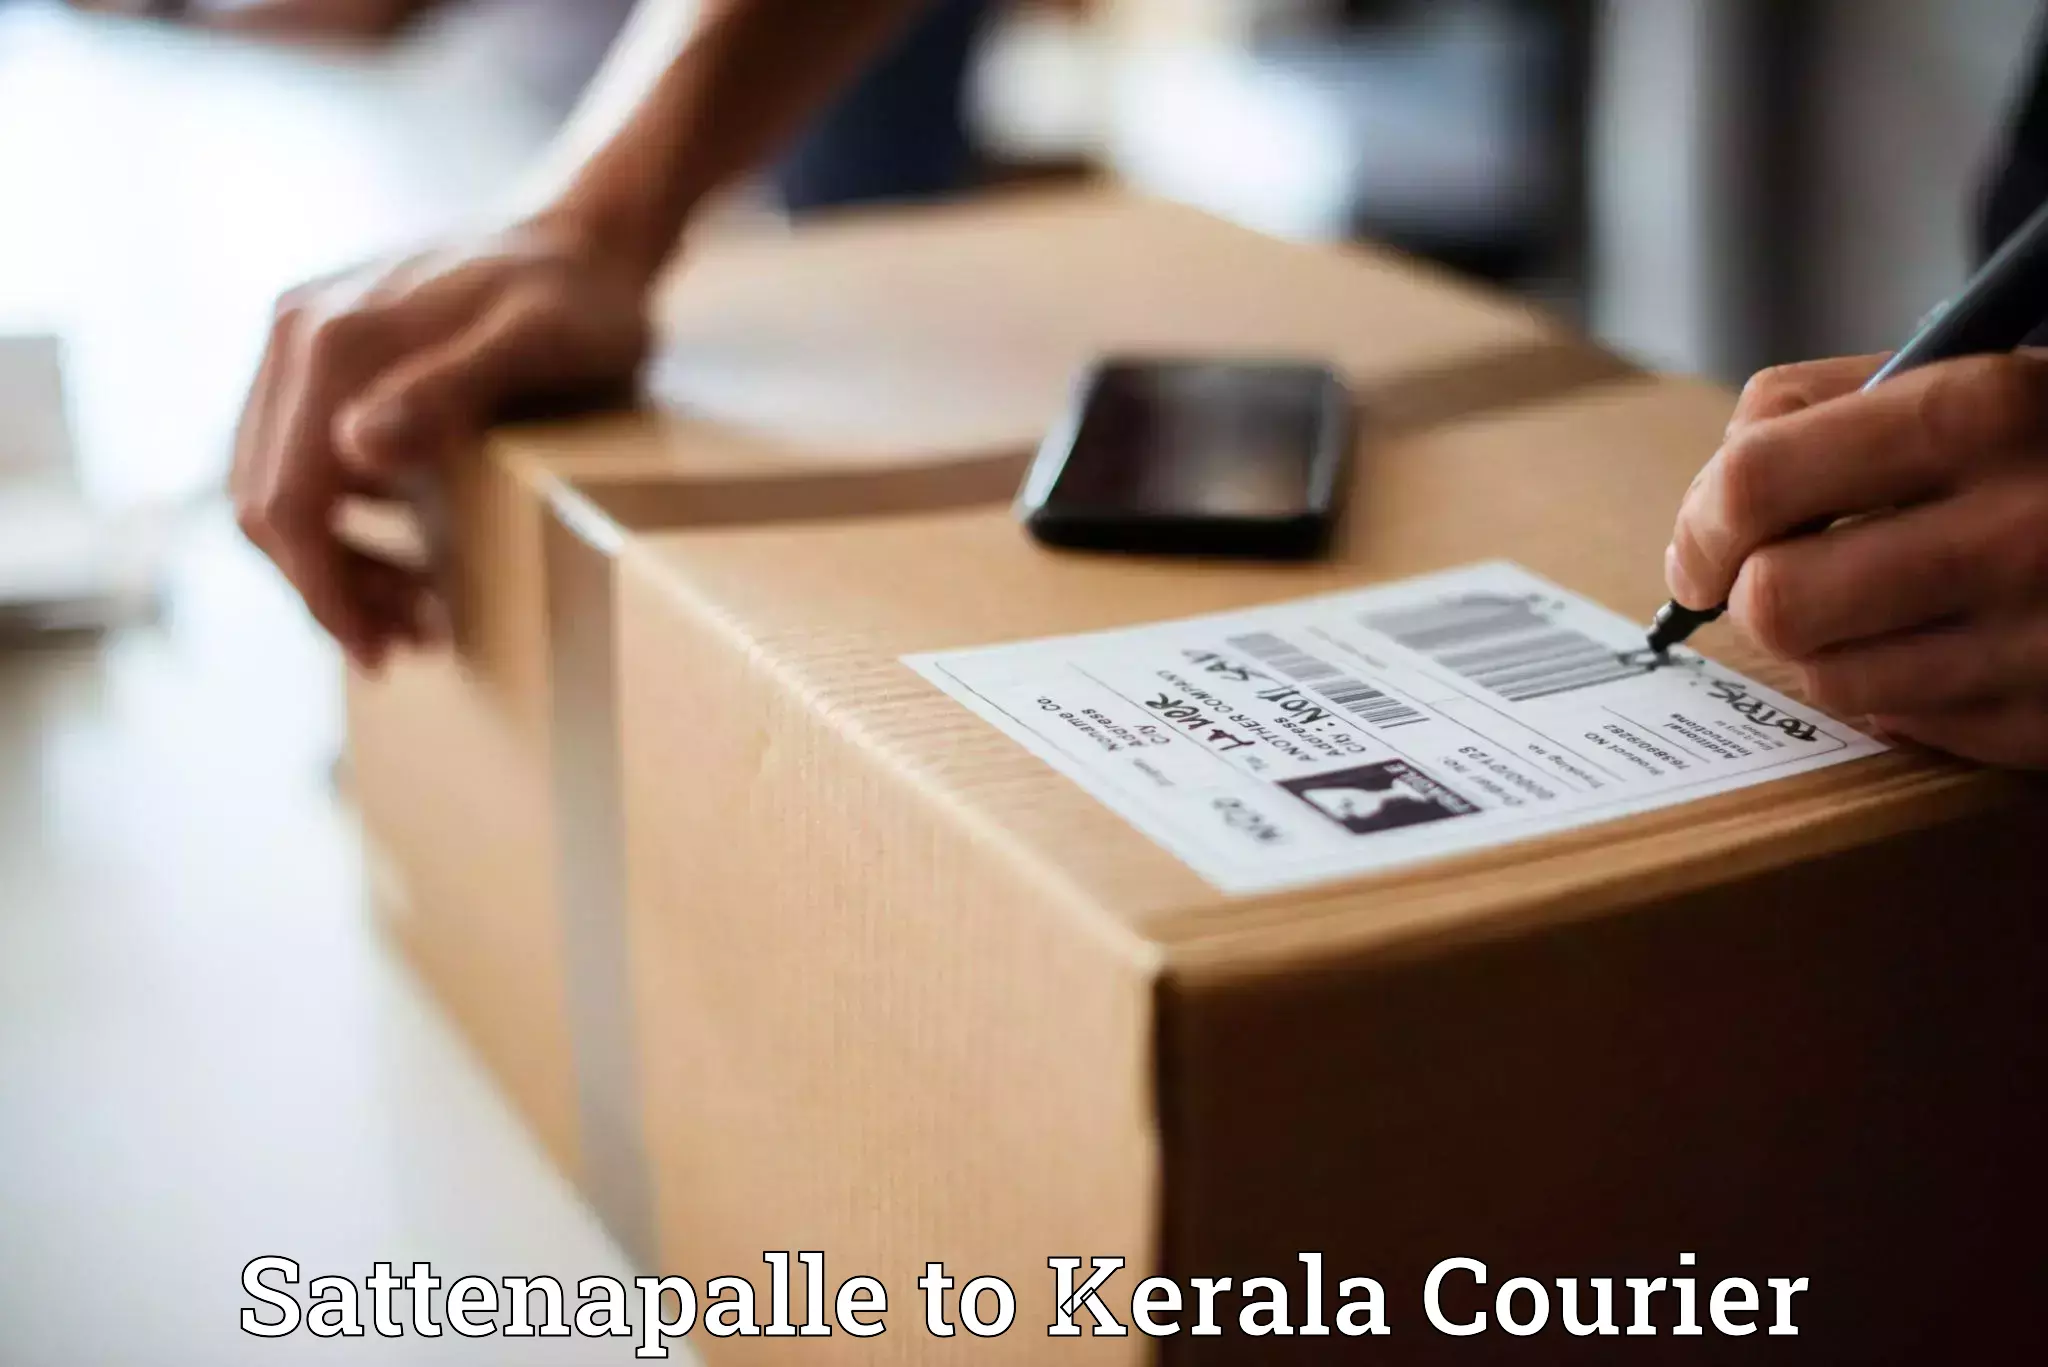 Speedy delivery service Sattenapalle to Rajamudy